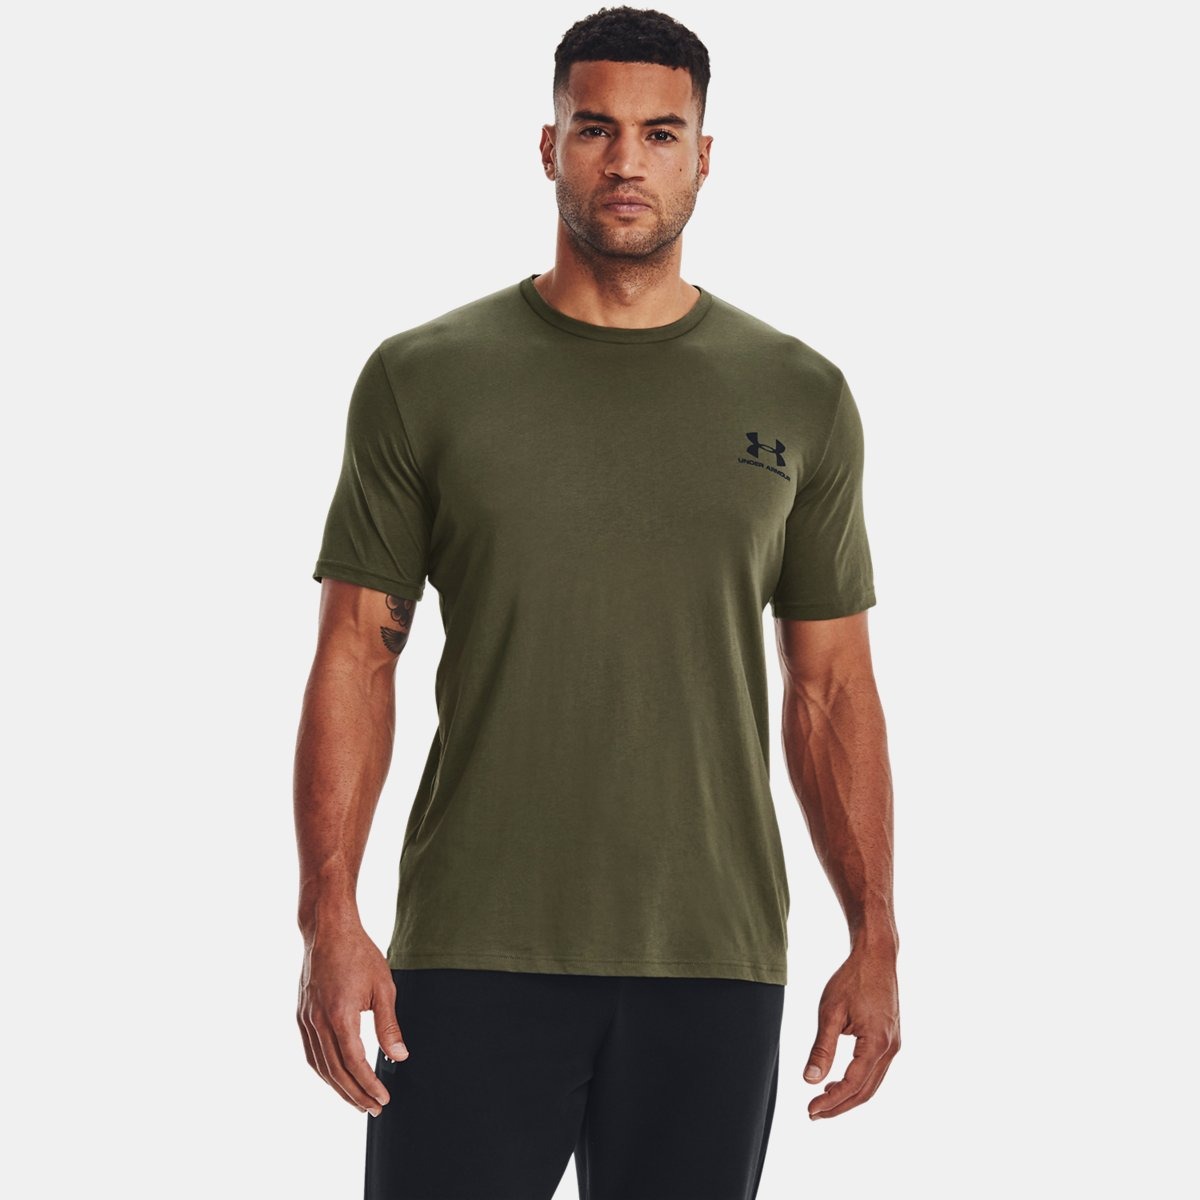 Gent Short Sleeve Shirt in Green from Under Armour GOOFASH